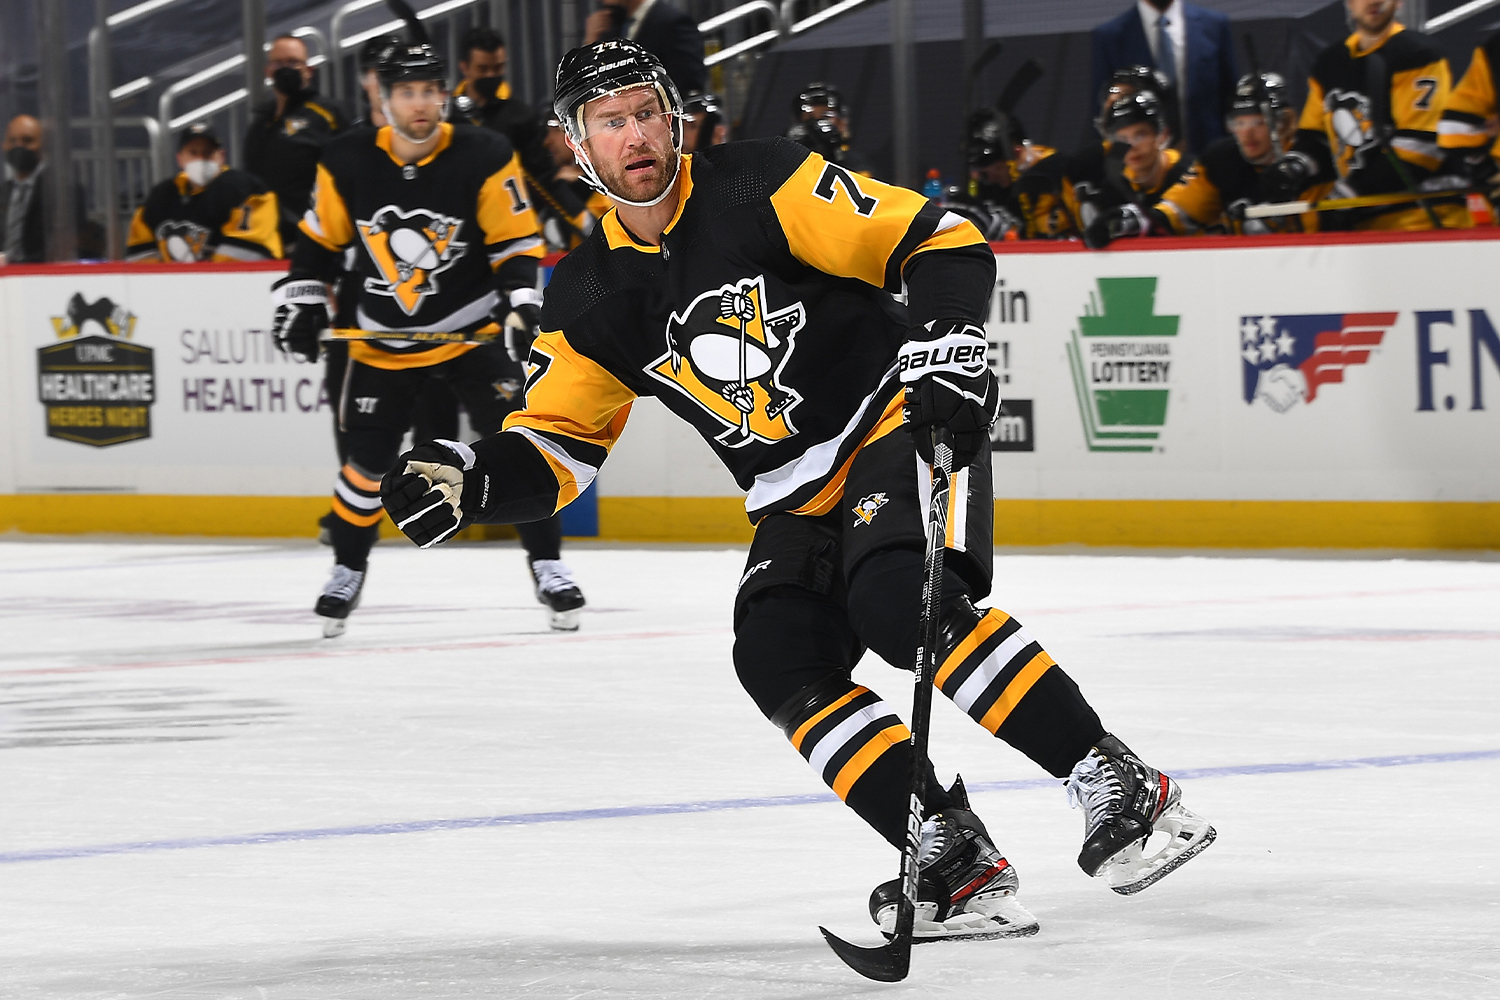 Jeff Carter #77 of the Pittsburgh Penguins skates against the Boston Bruins at PPG PAINTS Arena on April 27, 2021